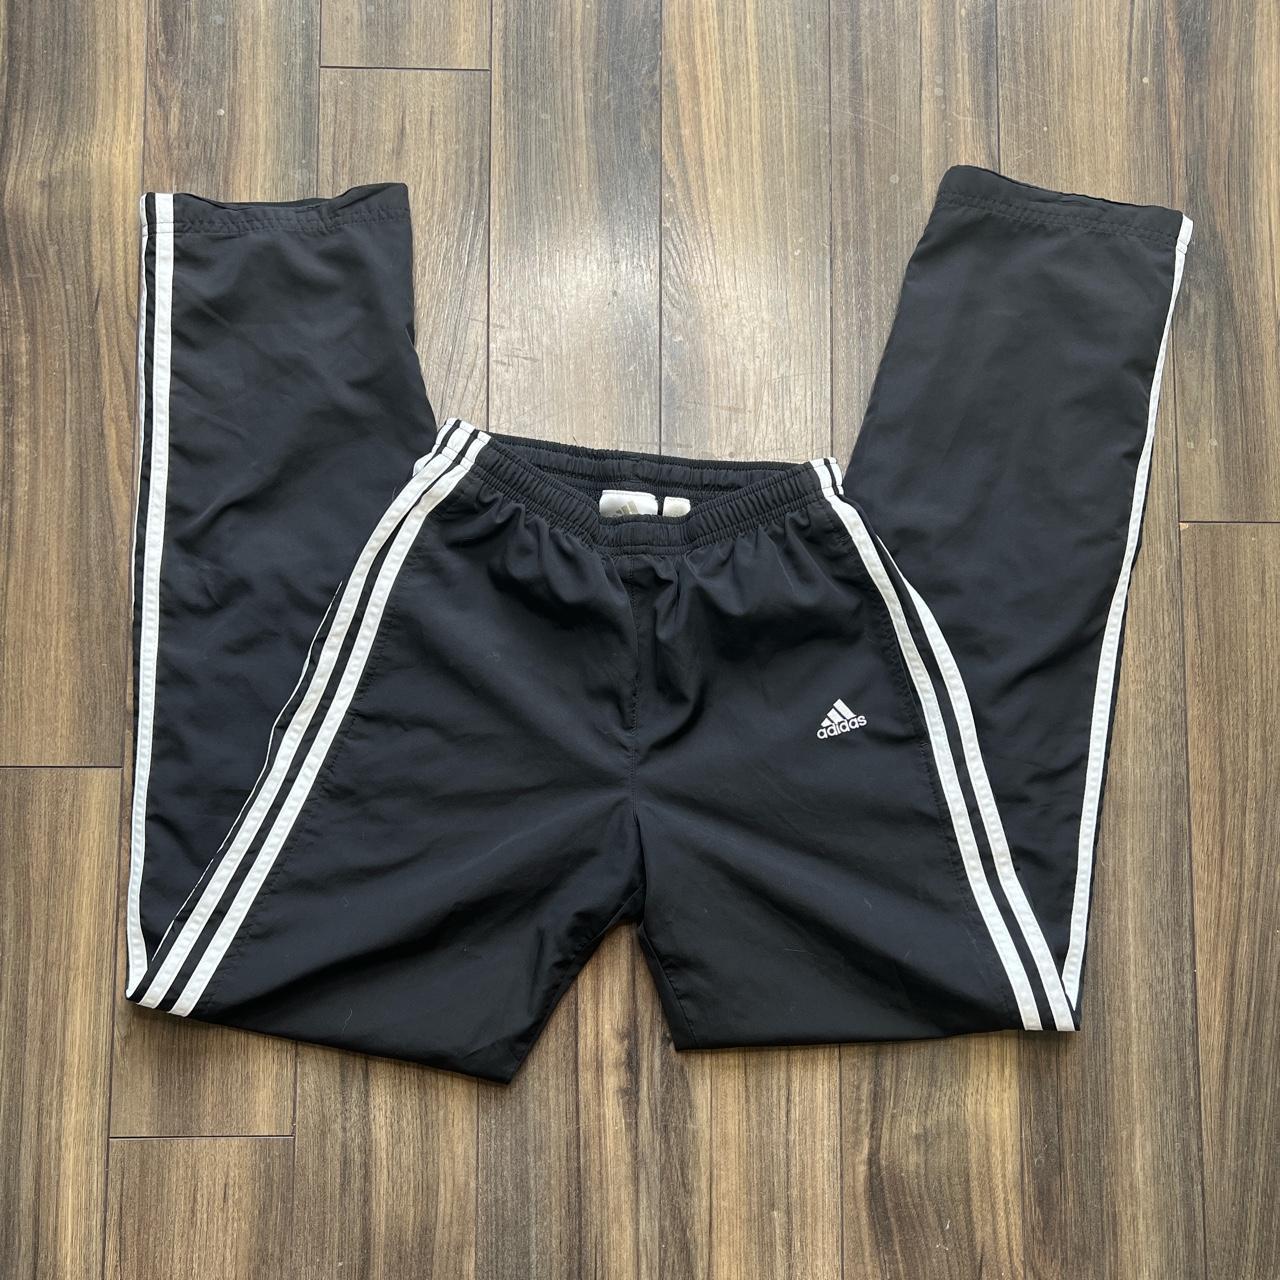 Adidas Women's Black and White Joggers-tracksuits